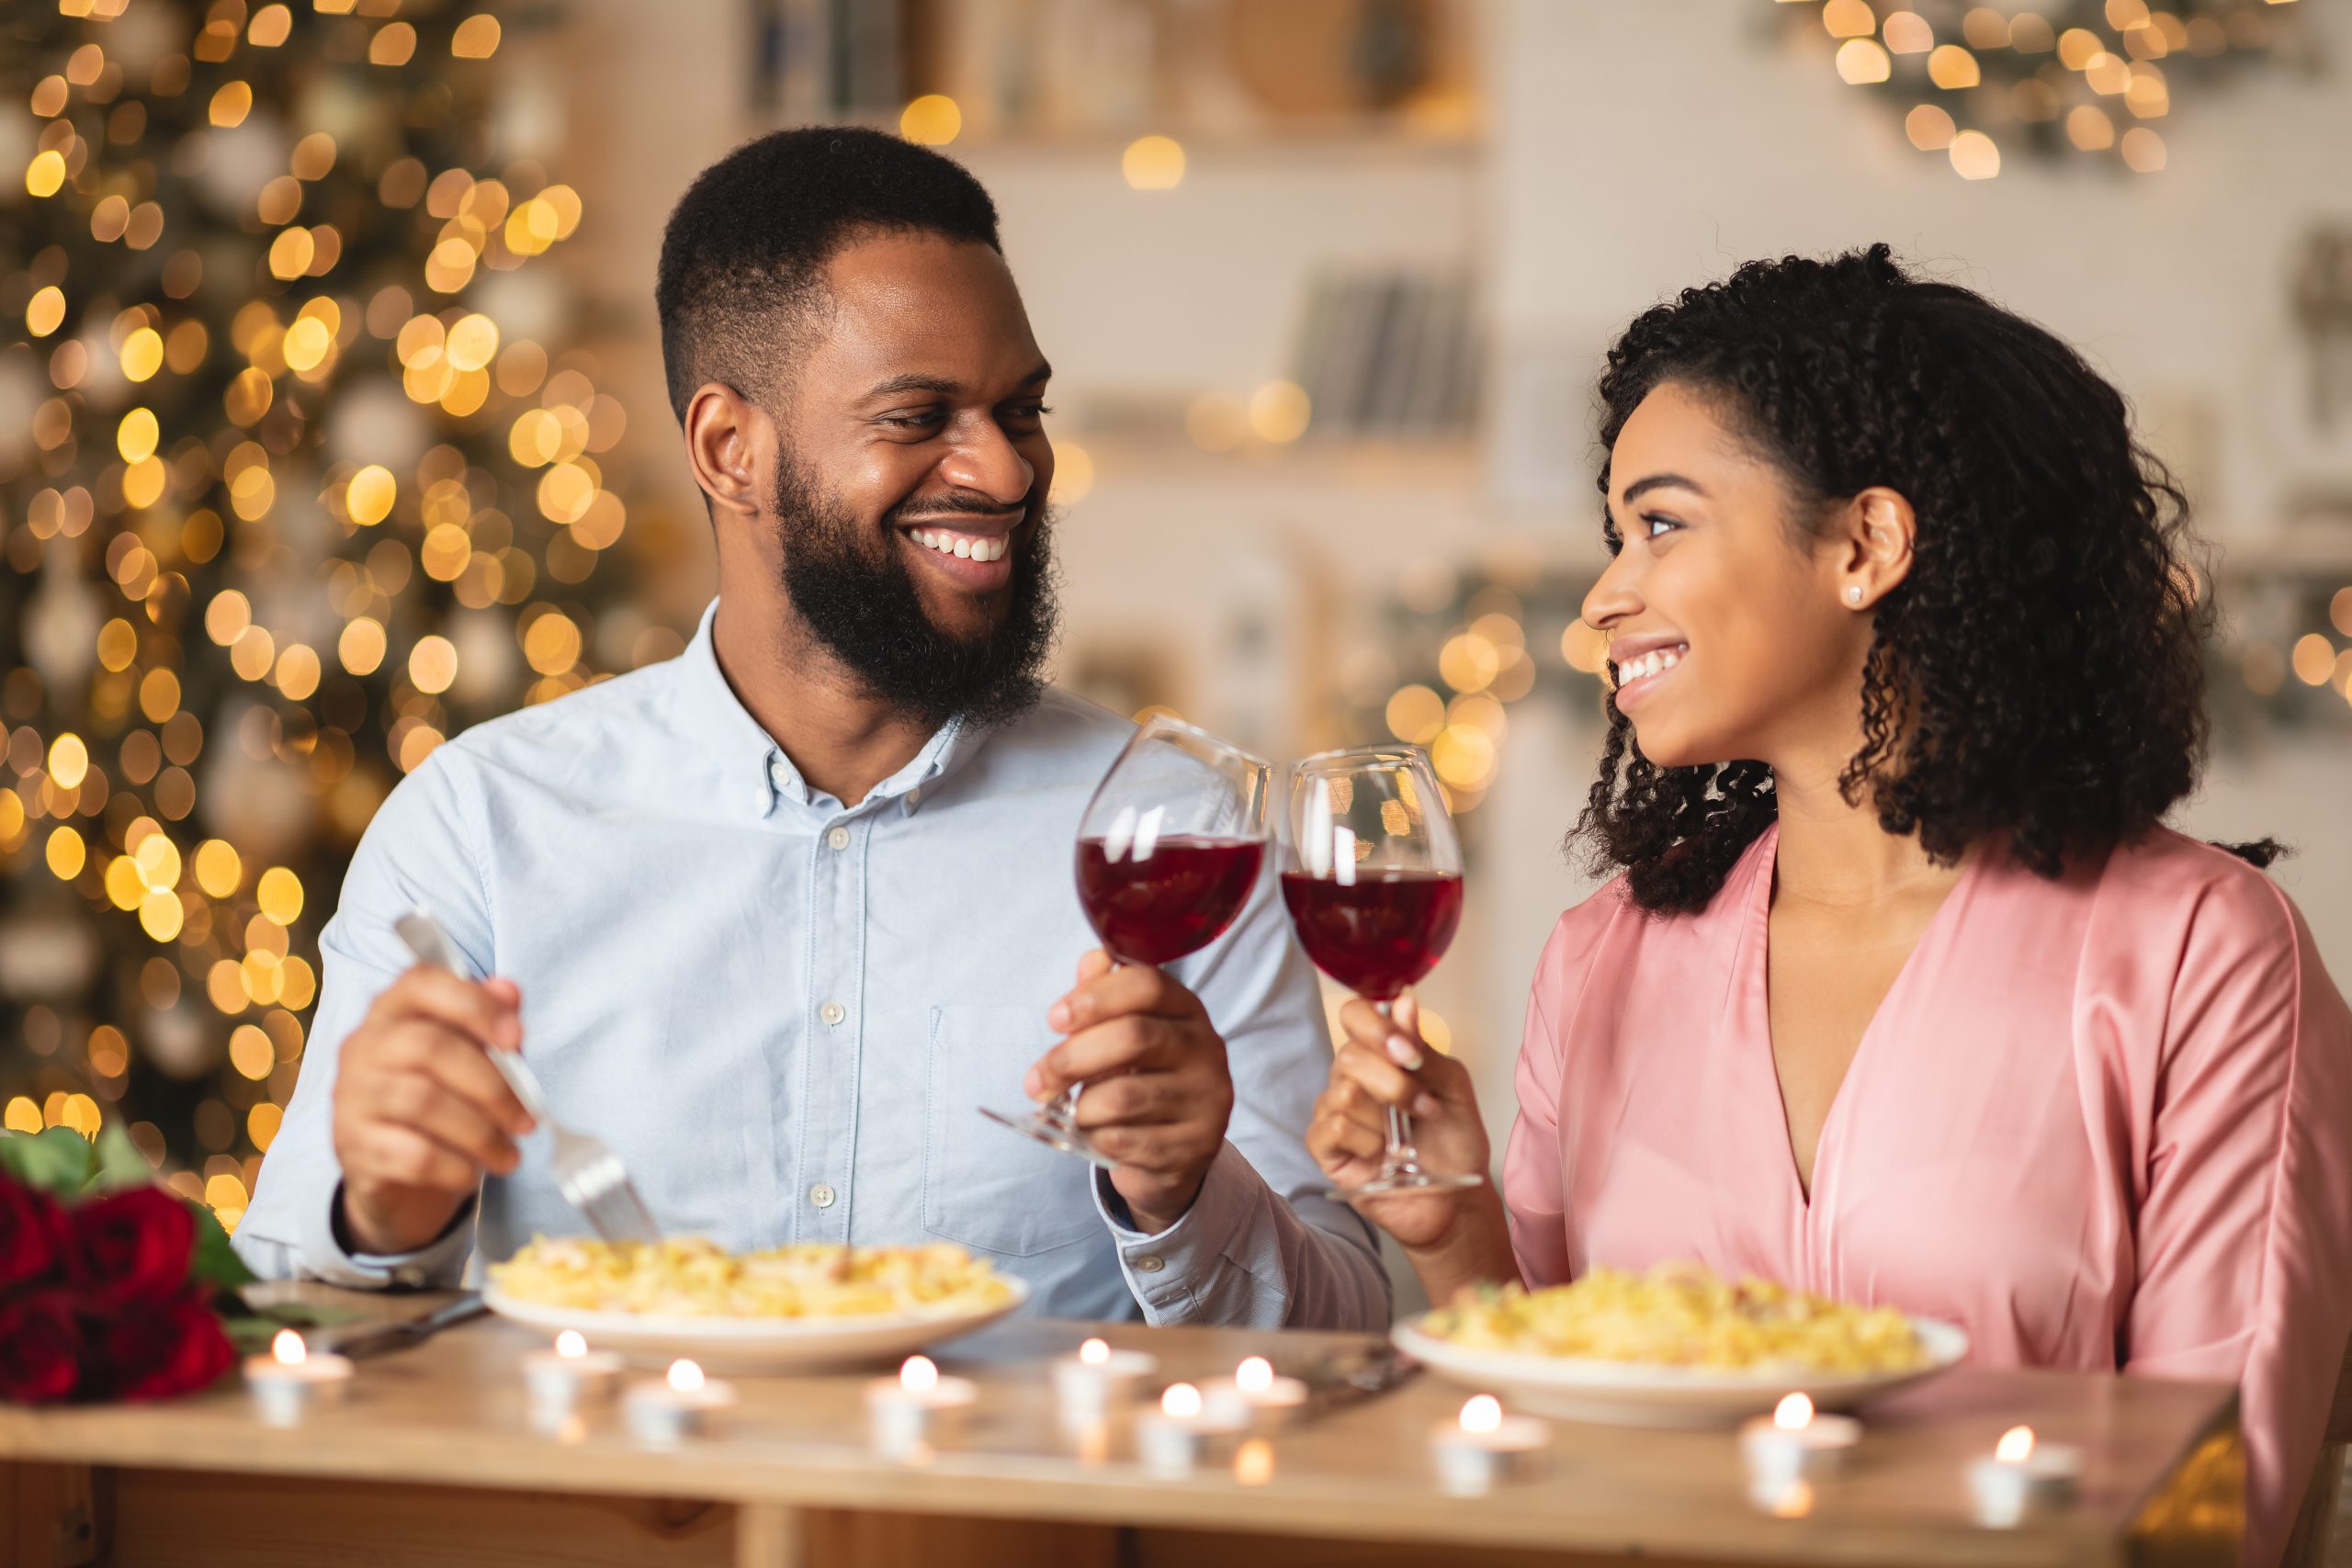 Couple drinking wine and eating